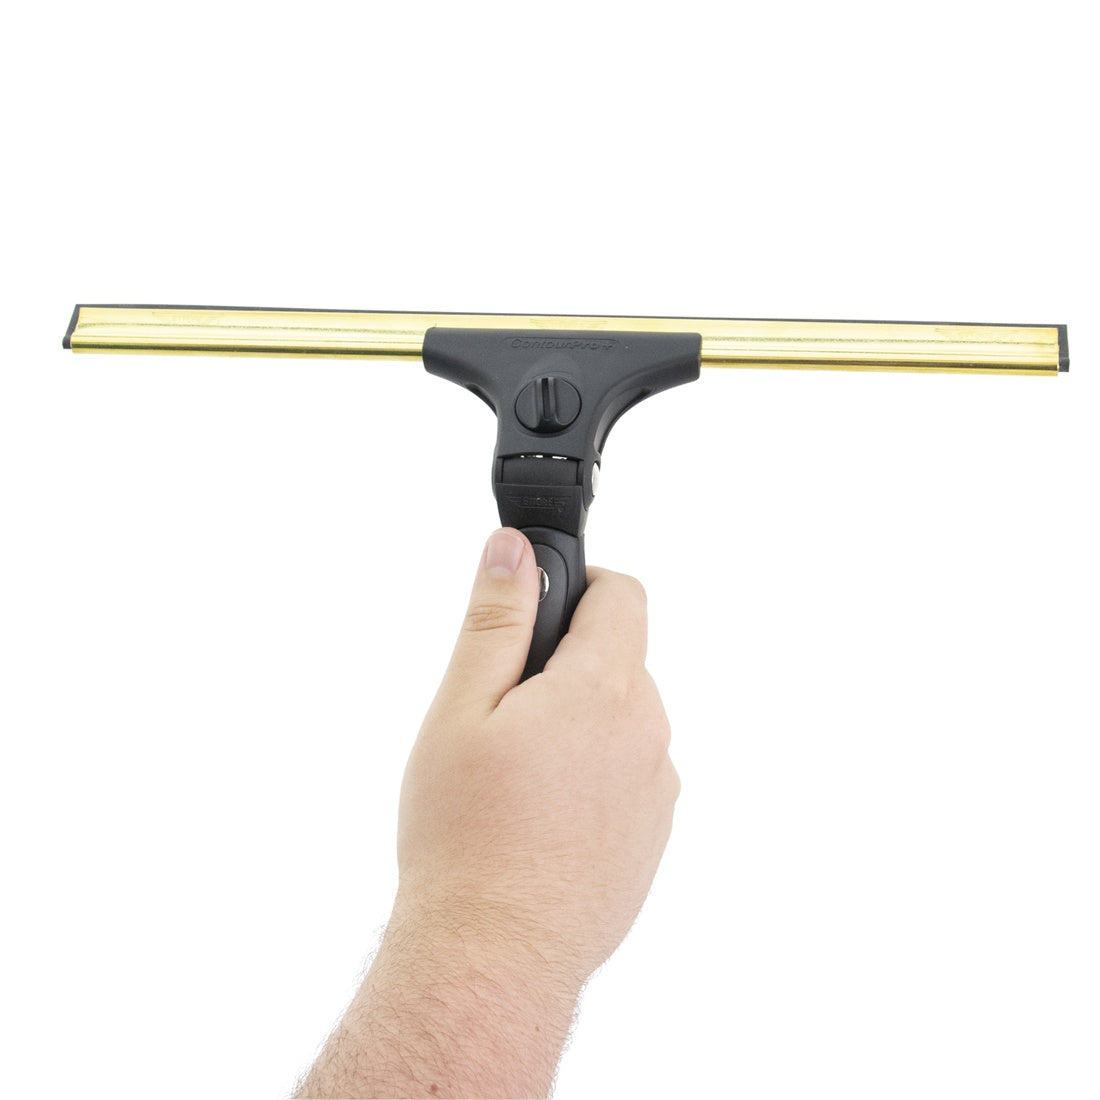 WINDOW/ Ettore Pro+ Complete Handle with Squeegee – Croaker, Inc